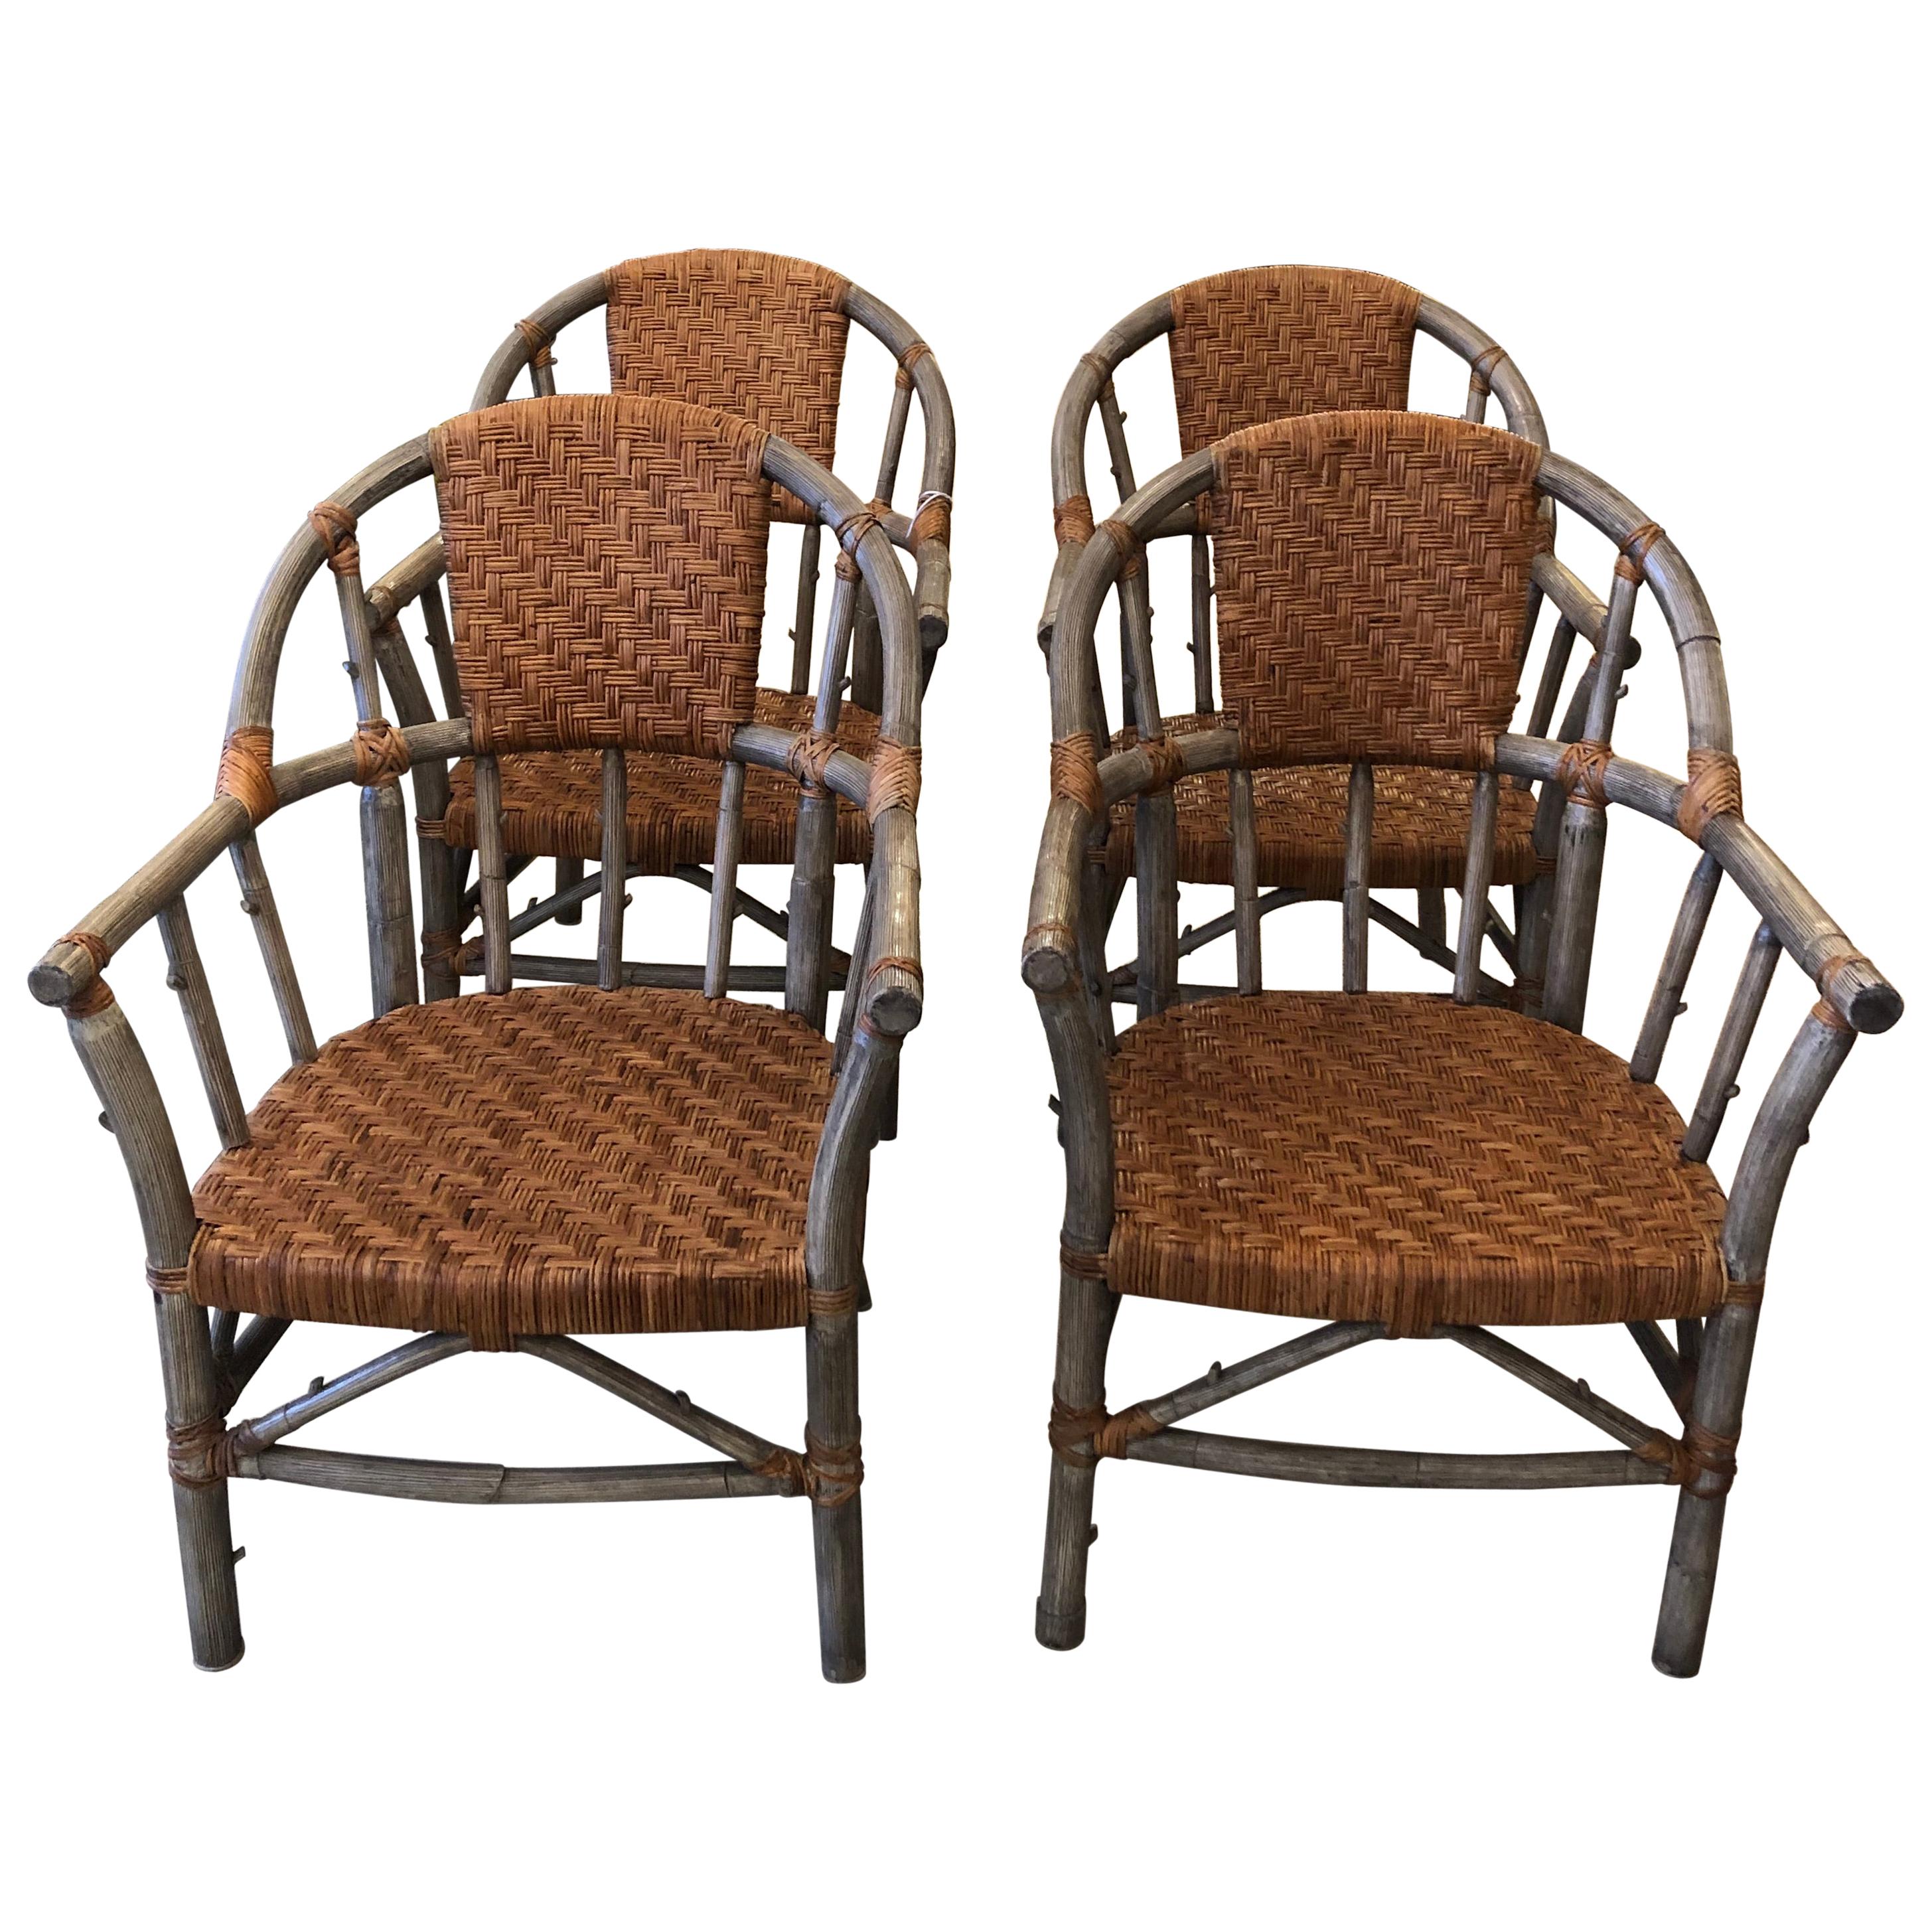 Stunning Set of 4 Faux Bois and Woven Rattan Captain Style Dining Chairs